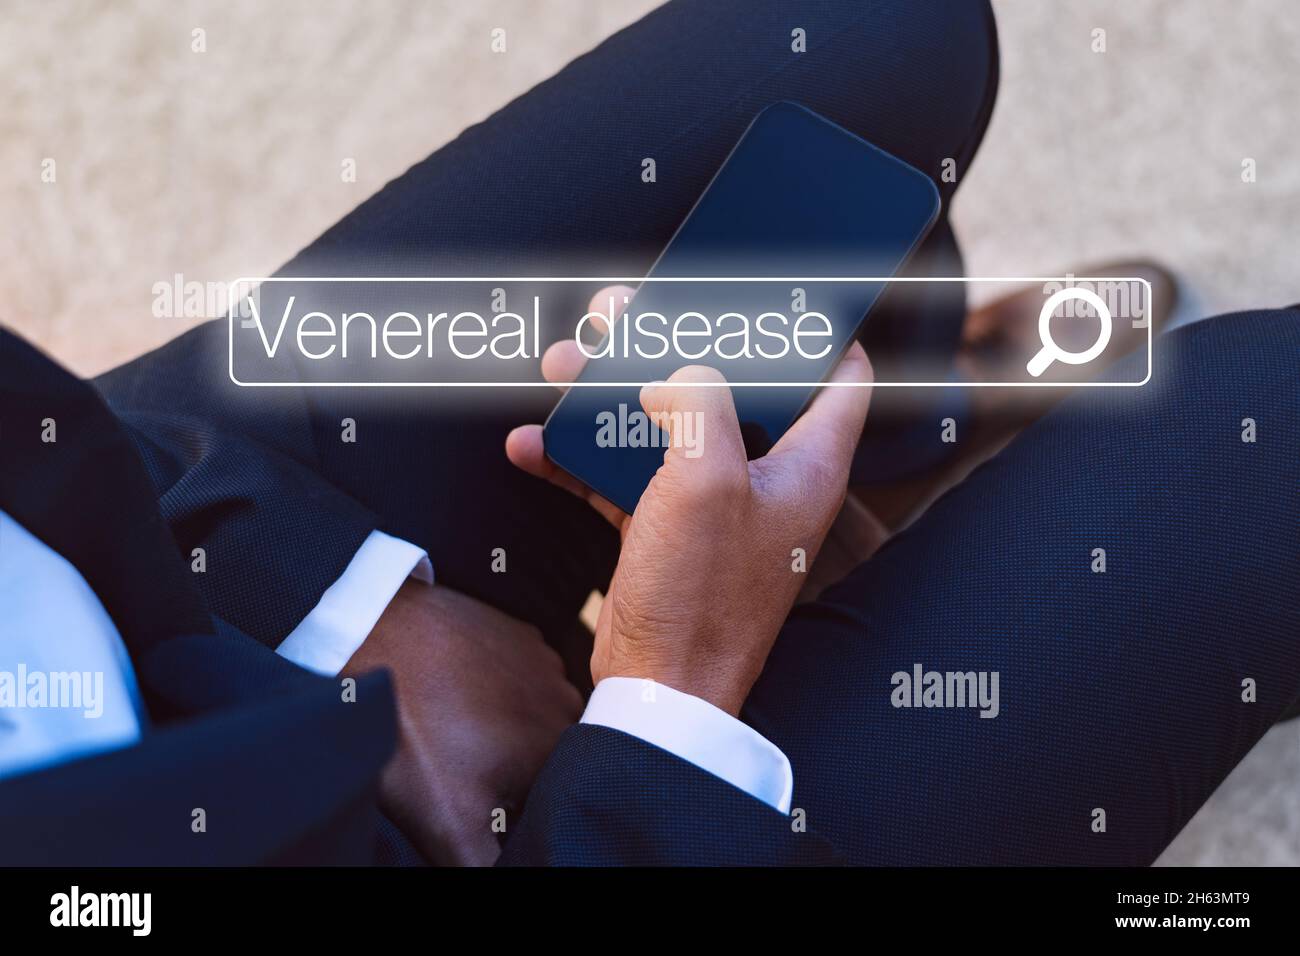 Man with urology problems searching in internet about venereal disease Stock Photo